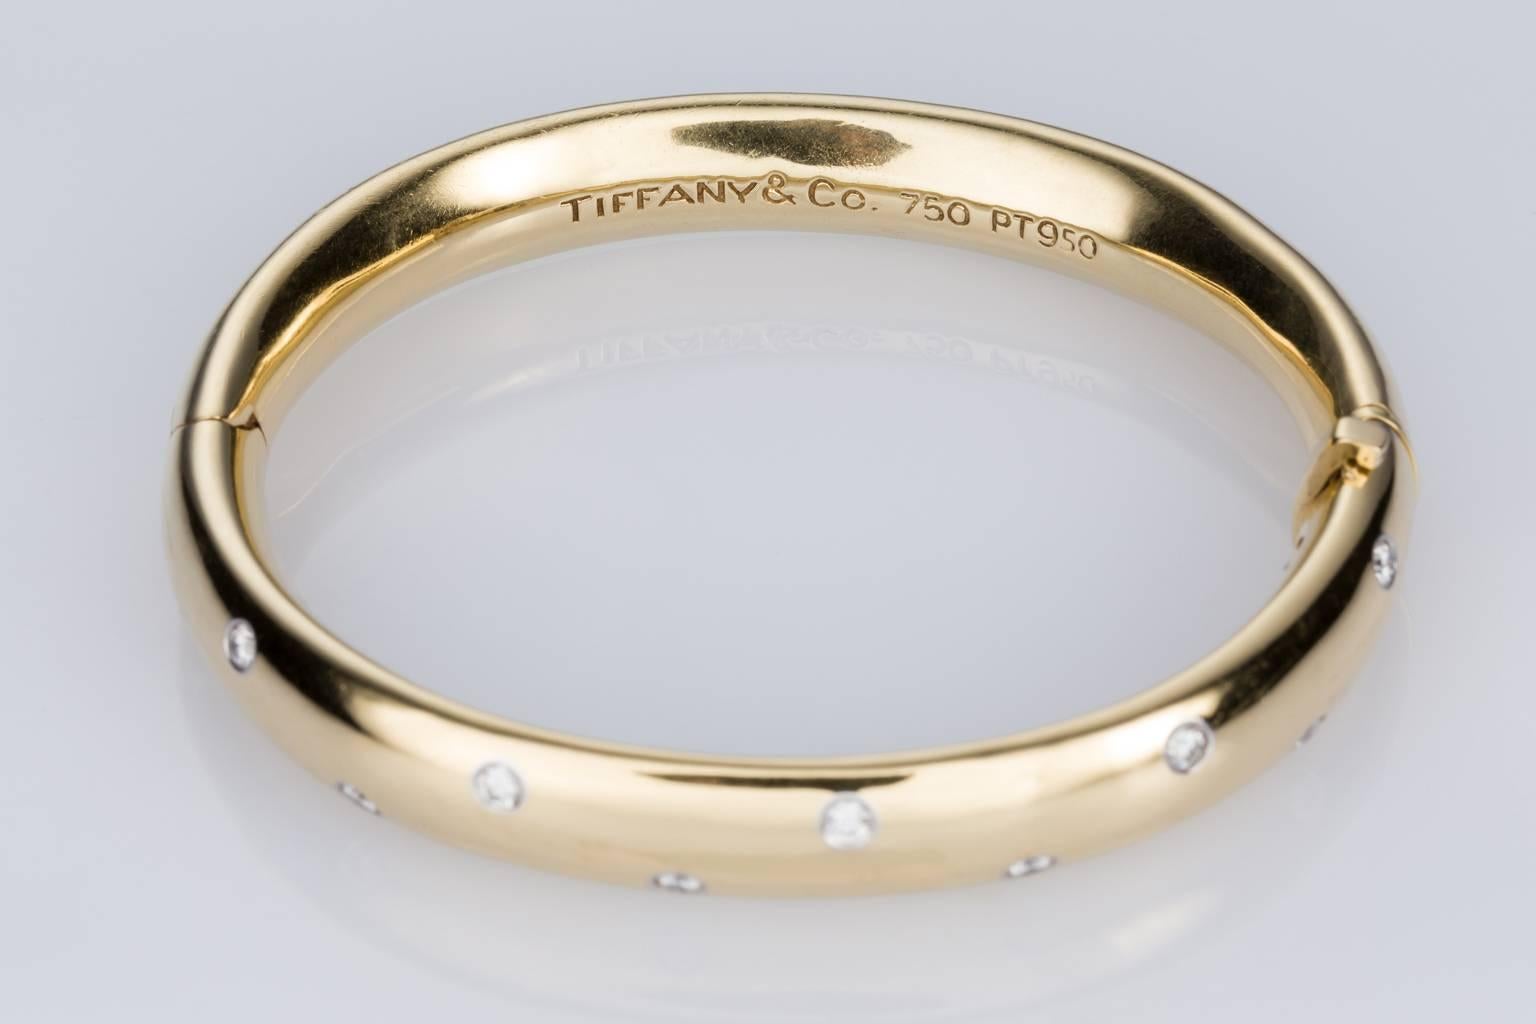 A fabulous Tiffany & Co yellow gold and platinum Etoile Bangle. A great look on the arm with 10 brilliant cut white diamonds weighing approximately 0.60cts with each diamond set in a fine platinum surround. 18k yellow gold with a weight of 